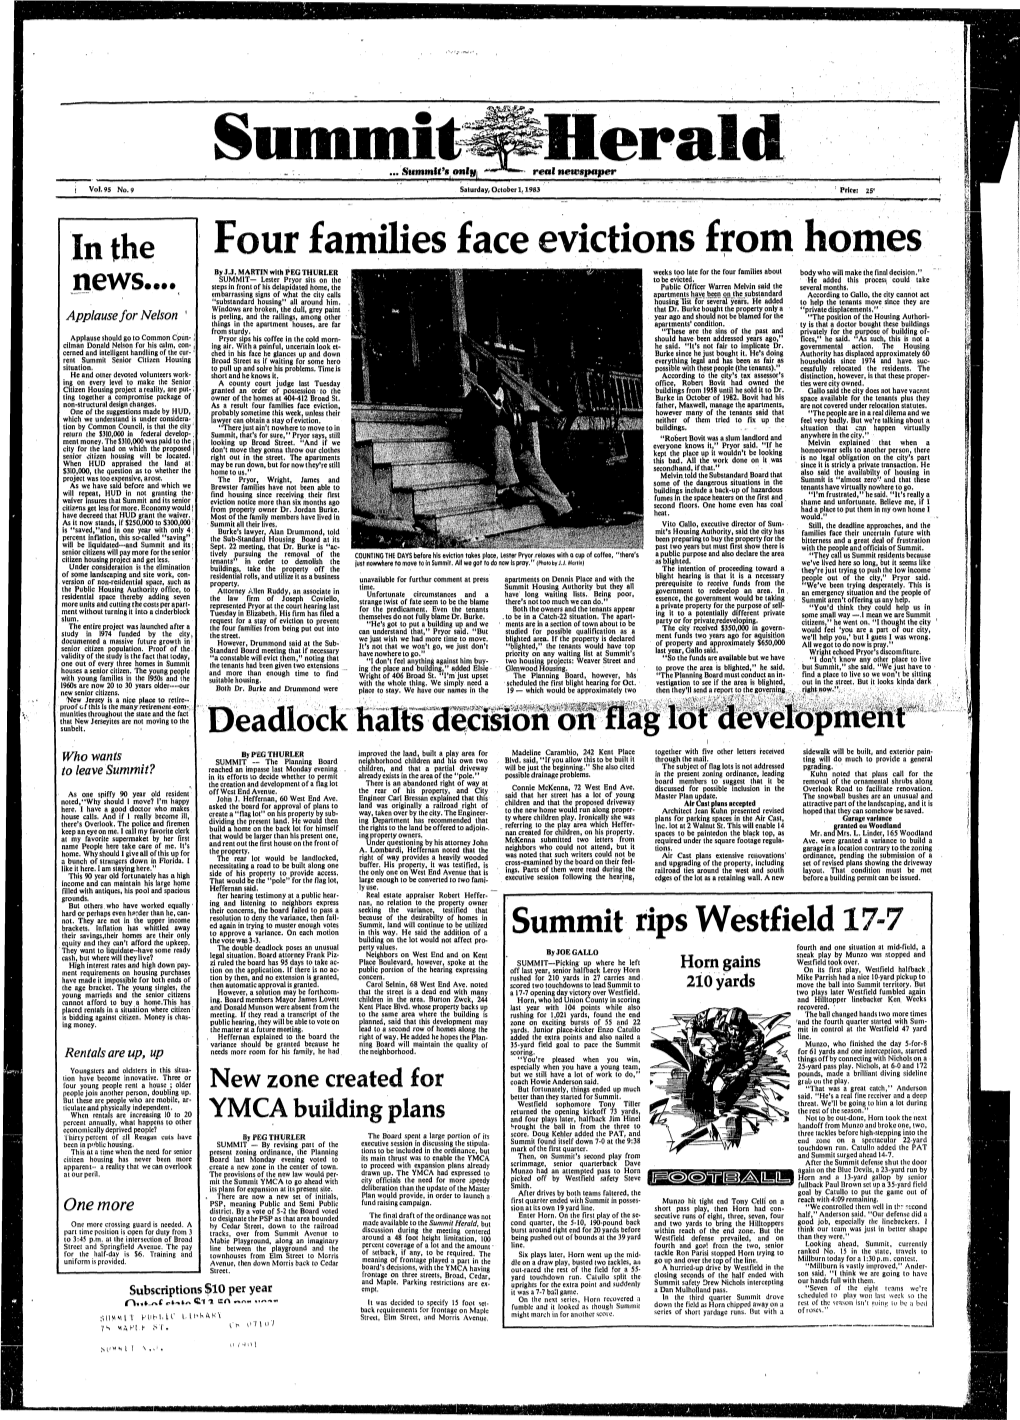 Four Families Face Evictions from Homes by J.J